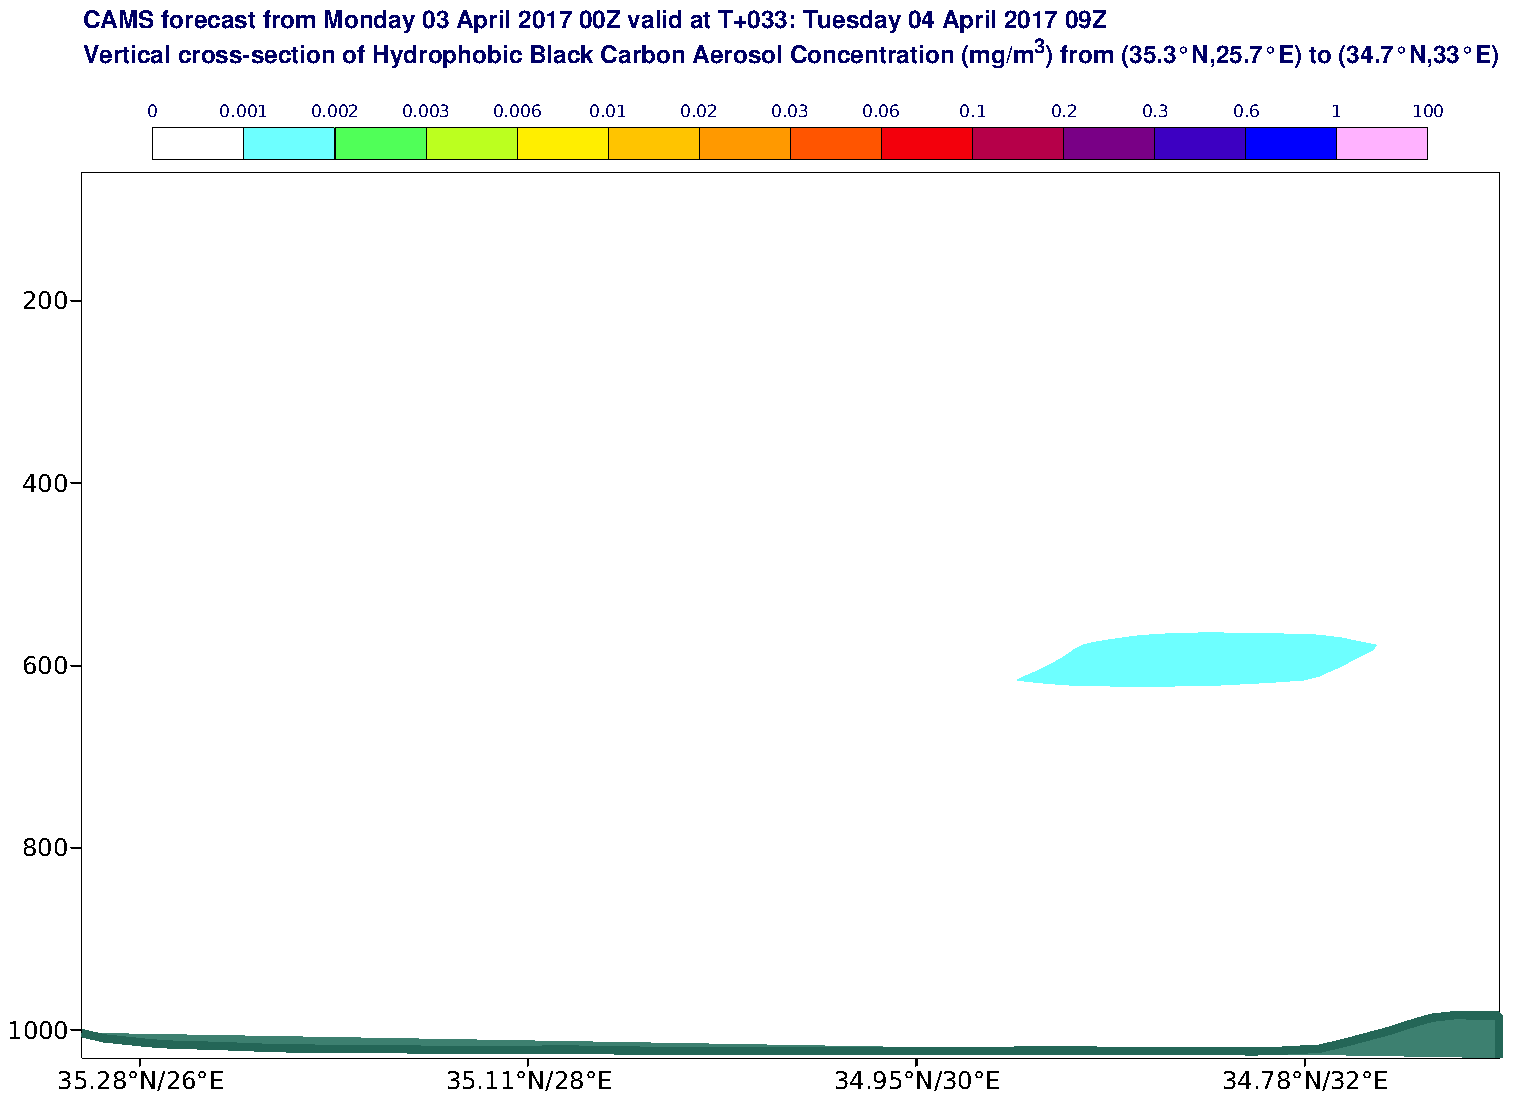 Vertical cross-section of Hydrophobic Black Carbon Aerosol Concentration (mg/m3) valid at T33 - 2017-04-04 09:00